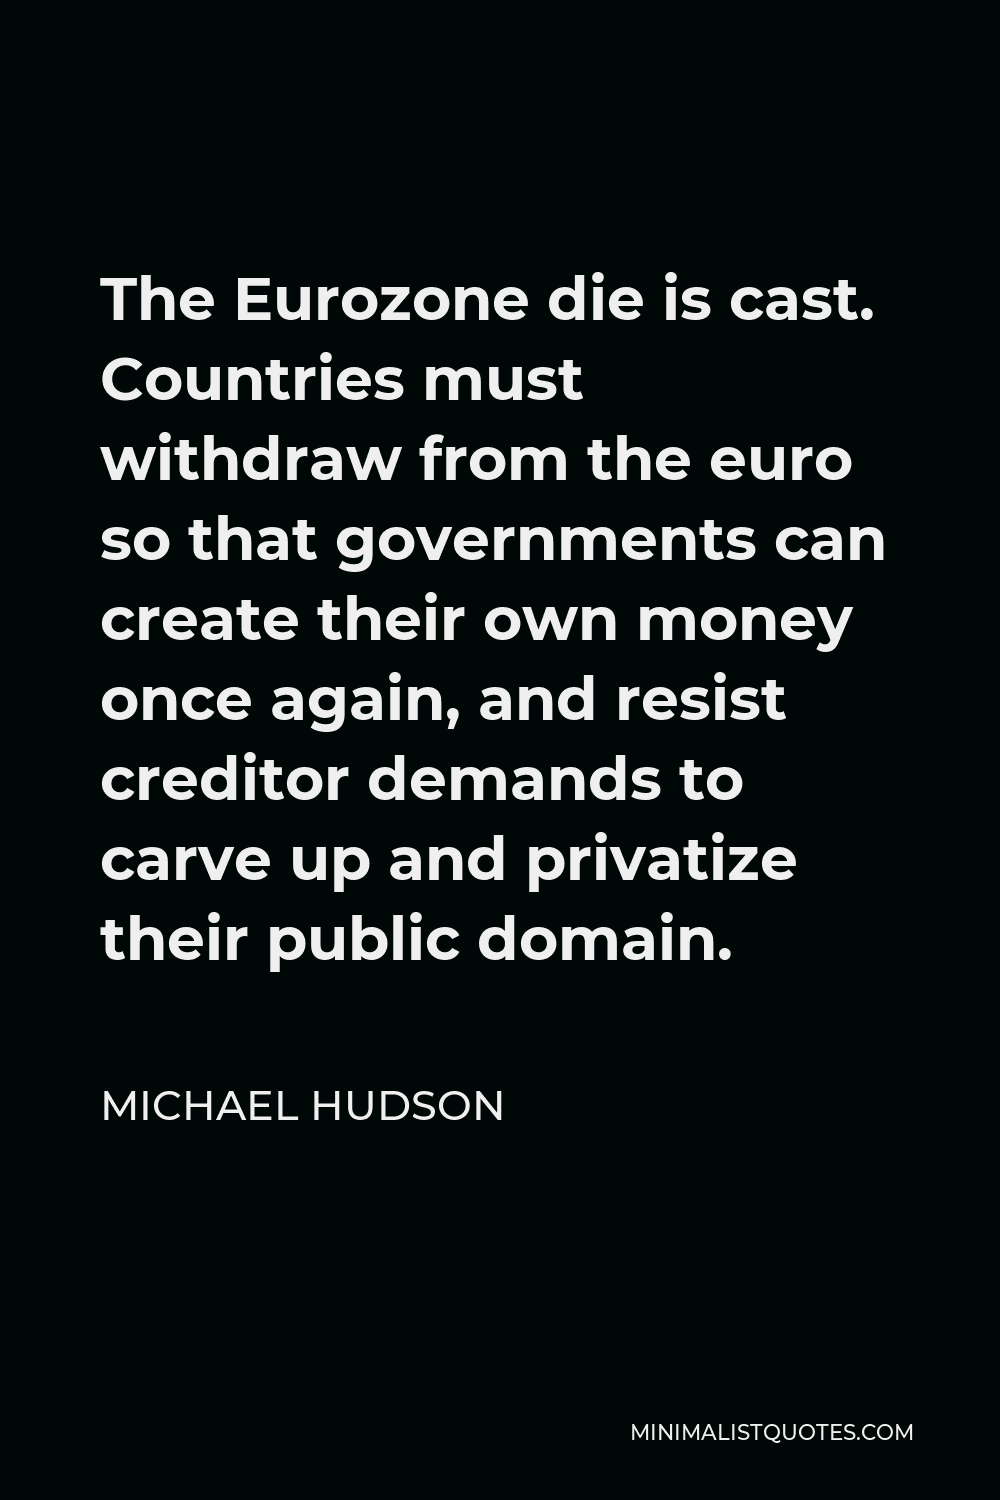 Michael Hudson Quote - The Eurozone die is cast. Countries must withdraw from the euro so that governments can create their own money once again, and resist creditor demands to carve up and privatize their public domain.